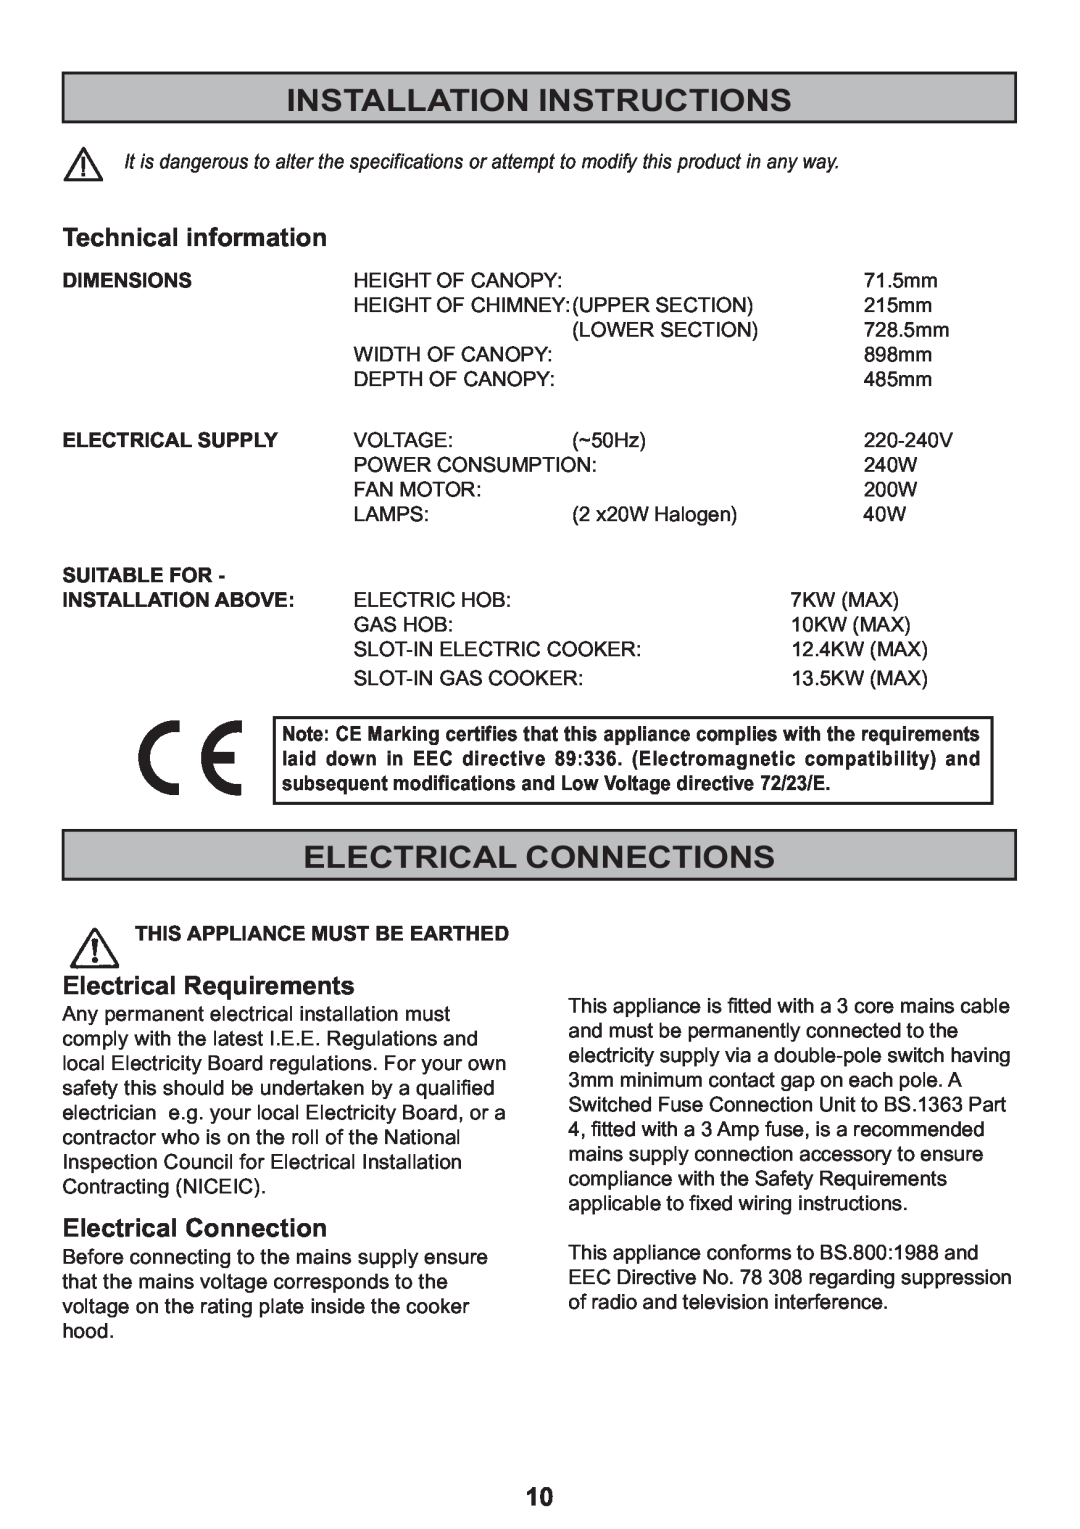 Zanussi ZHC 925 manual Installation Instructions, Electrical Connections, Dimensions, Electrical Supply, Suitable For 